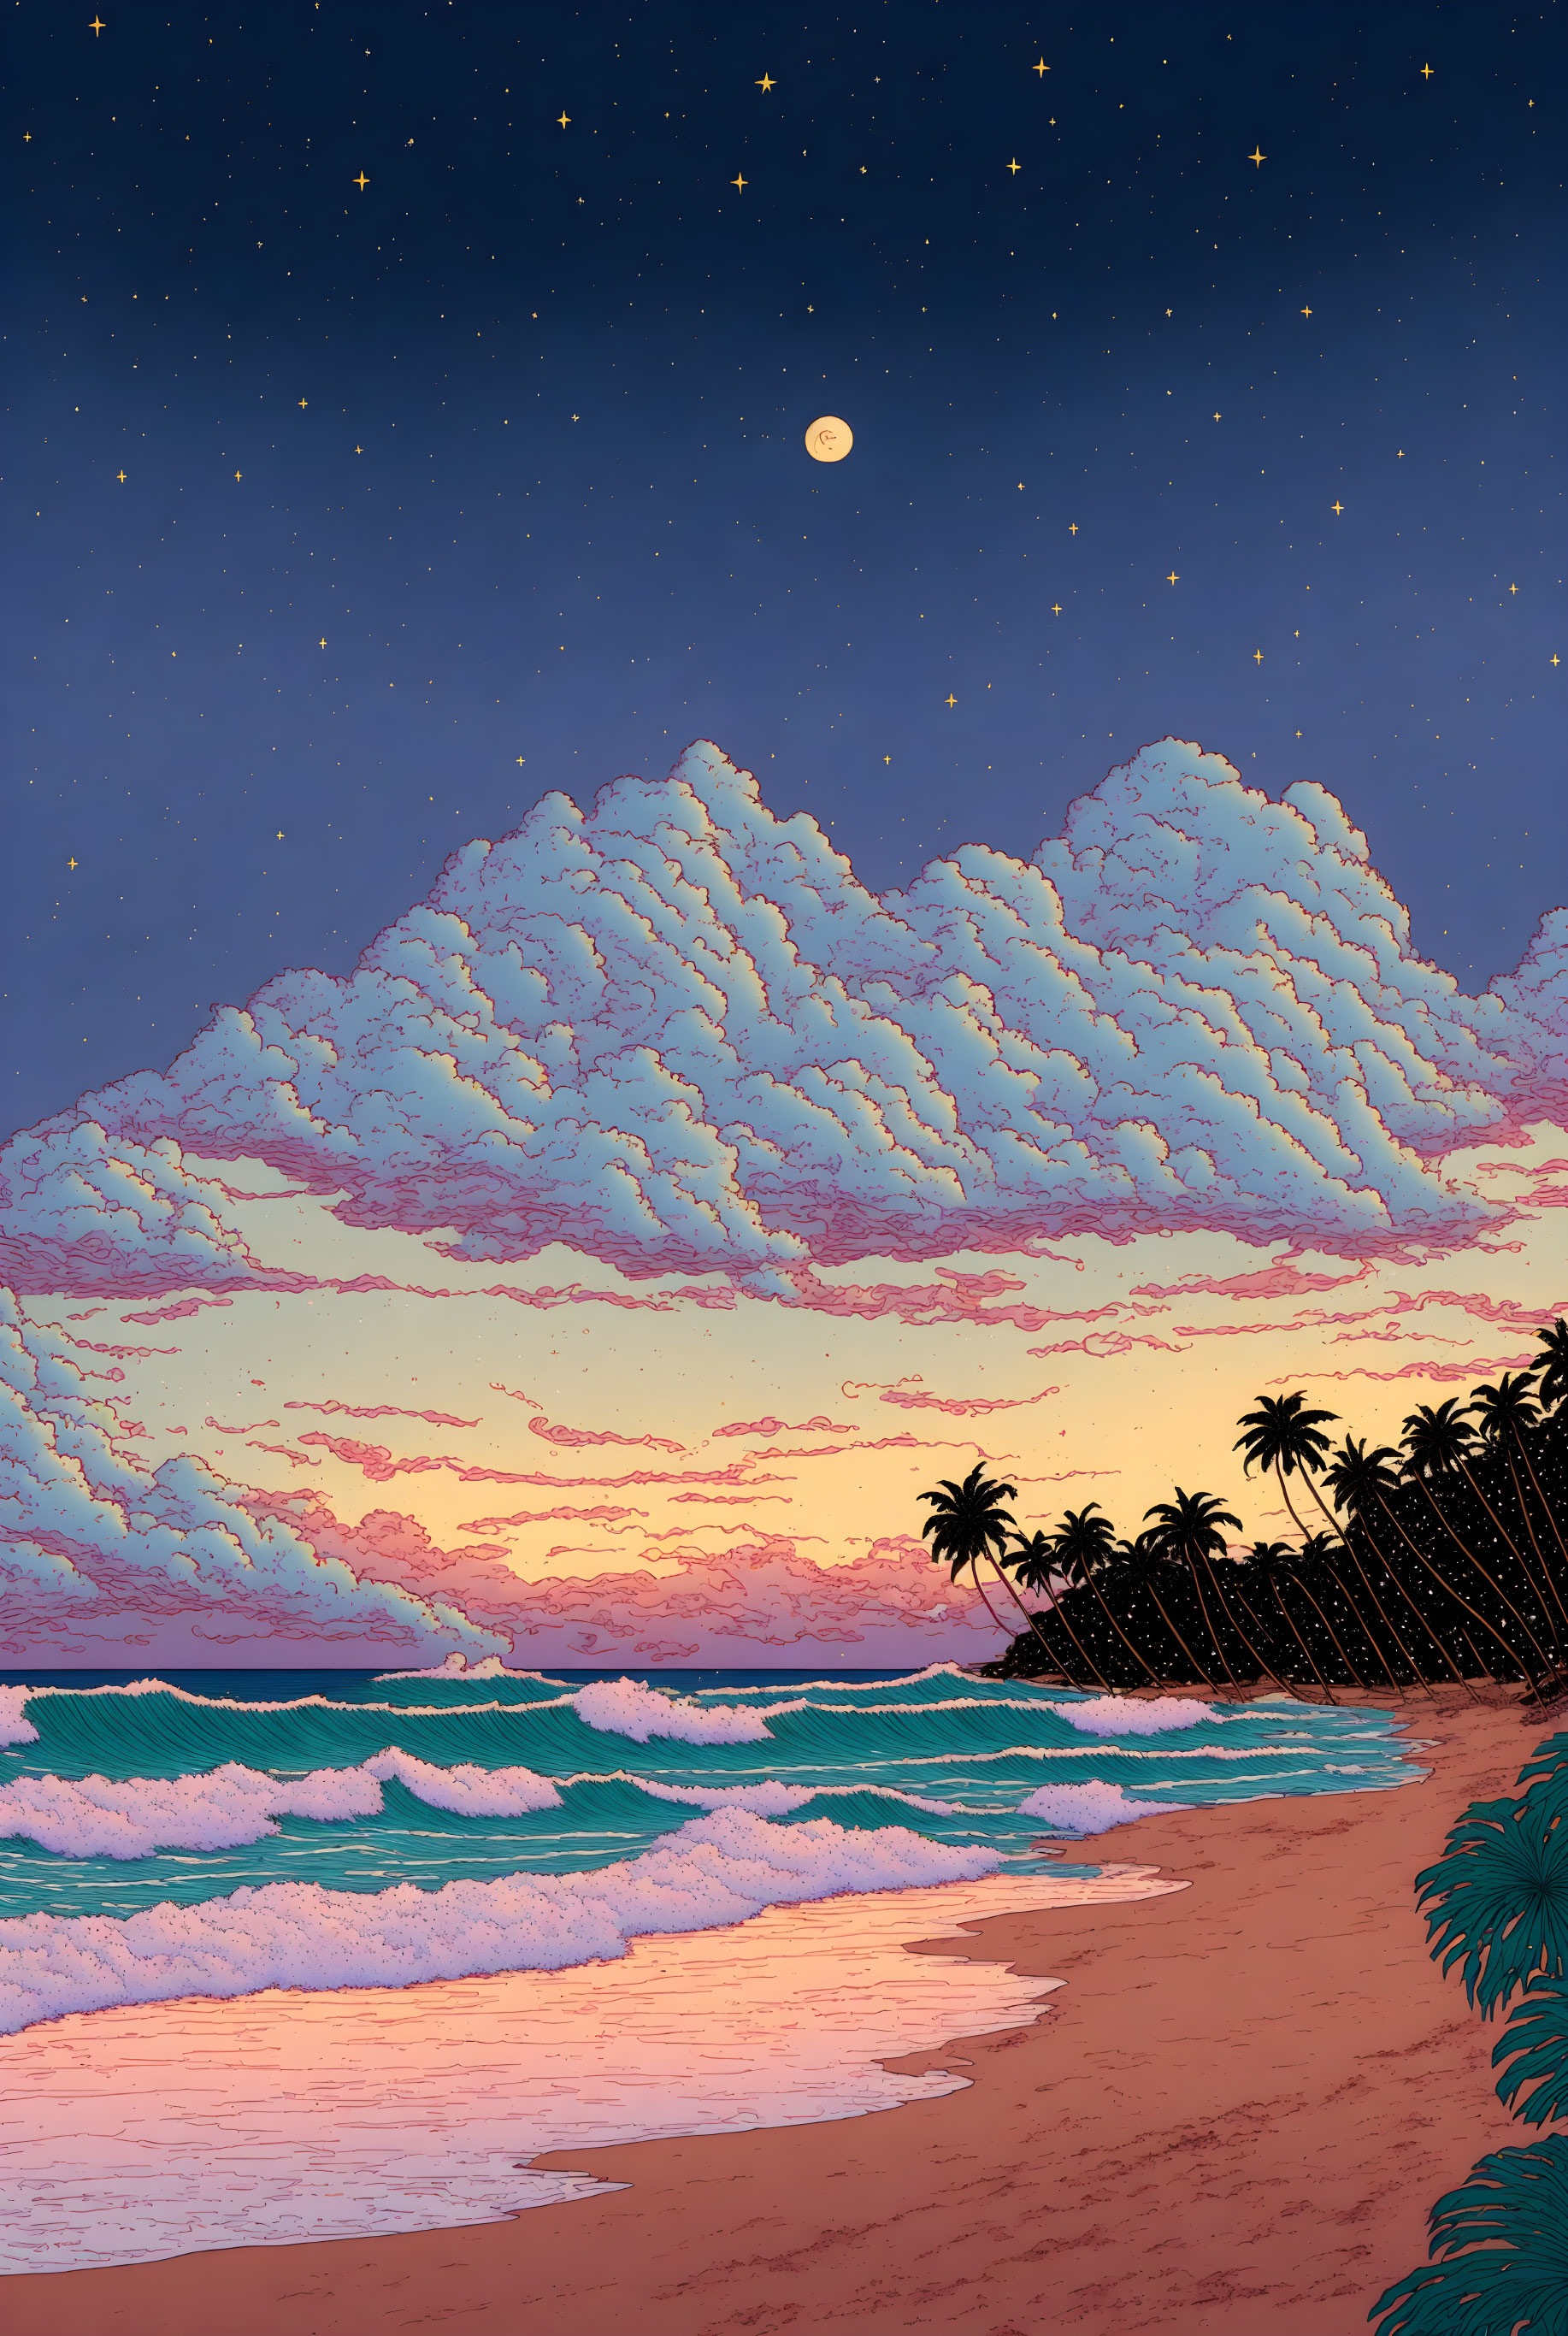 Tranquil beach scene at dusk with starry sky, moon, clouds, waves, palm tree